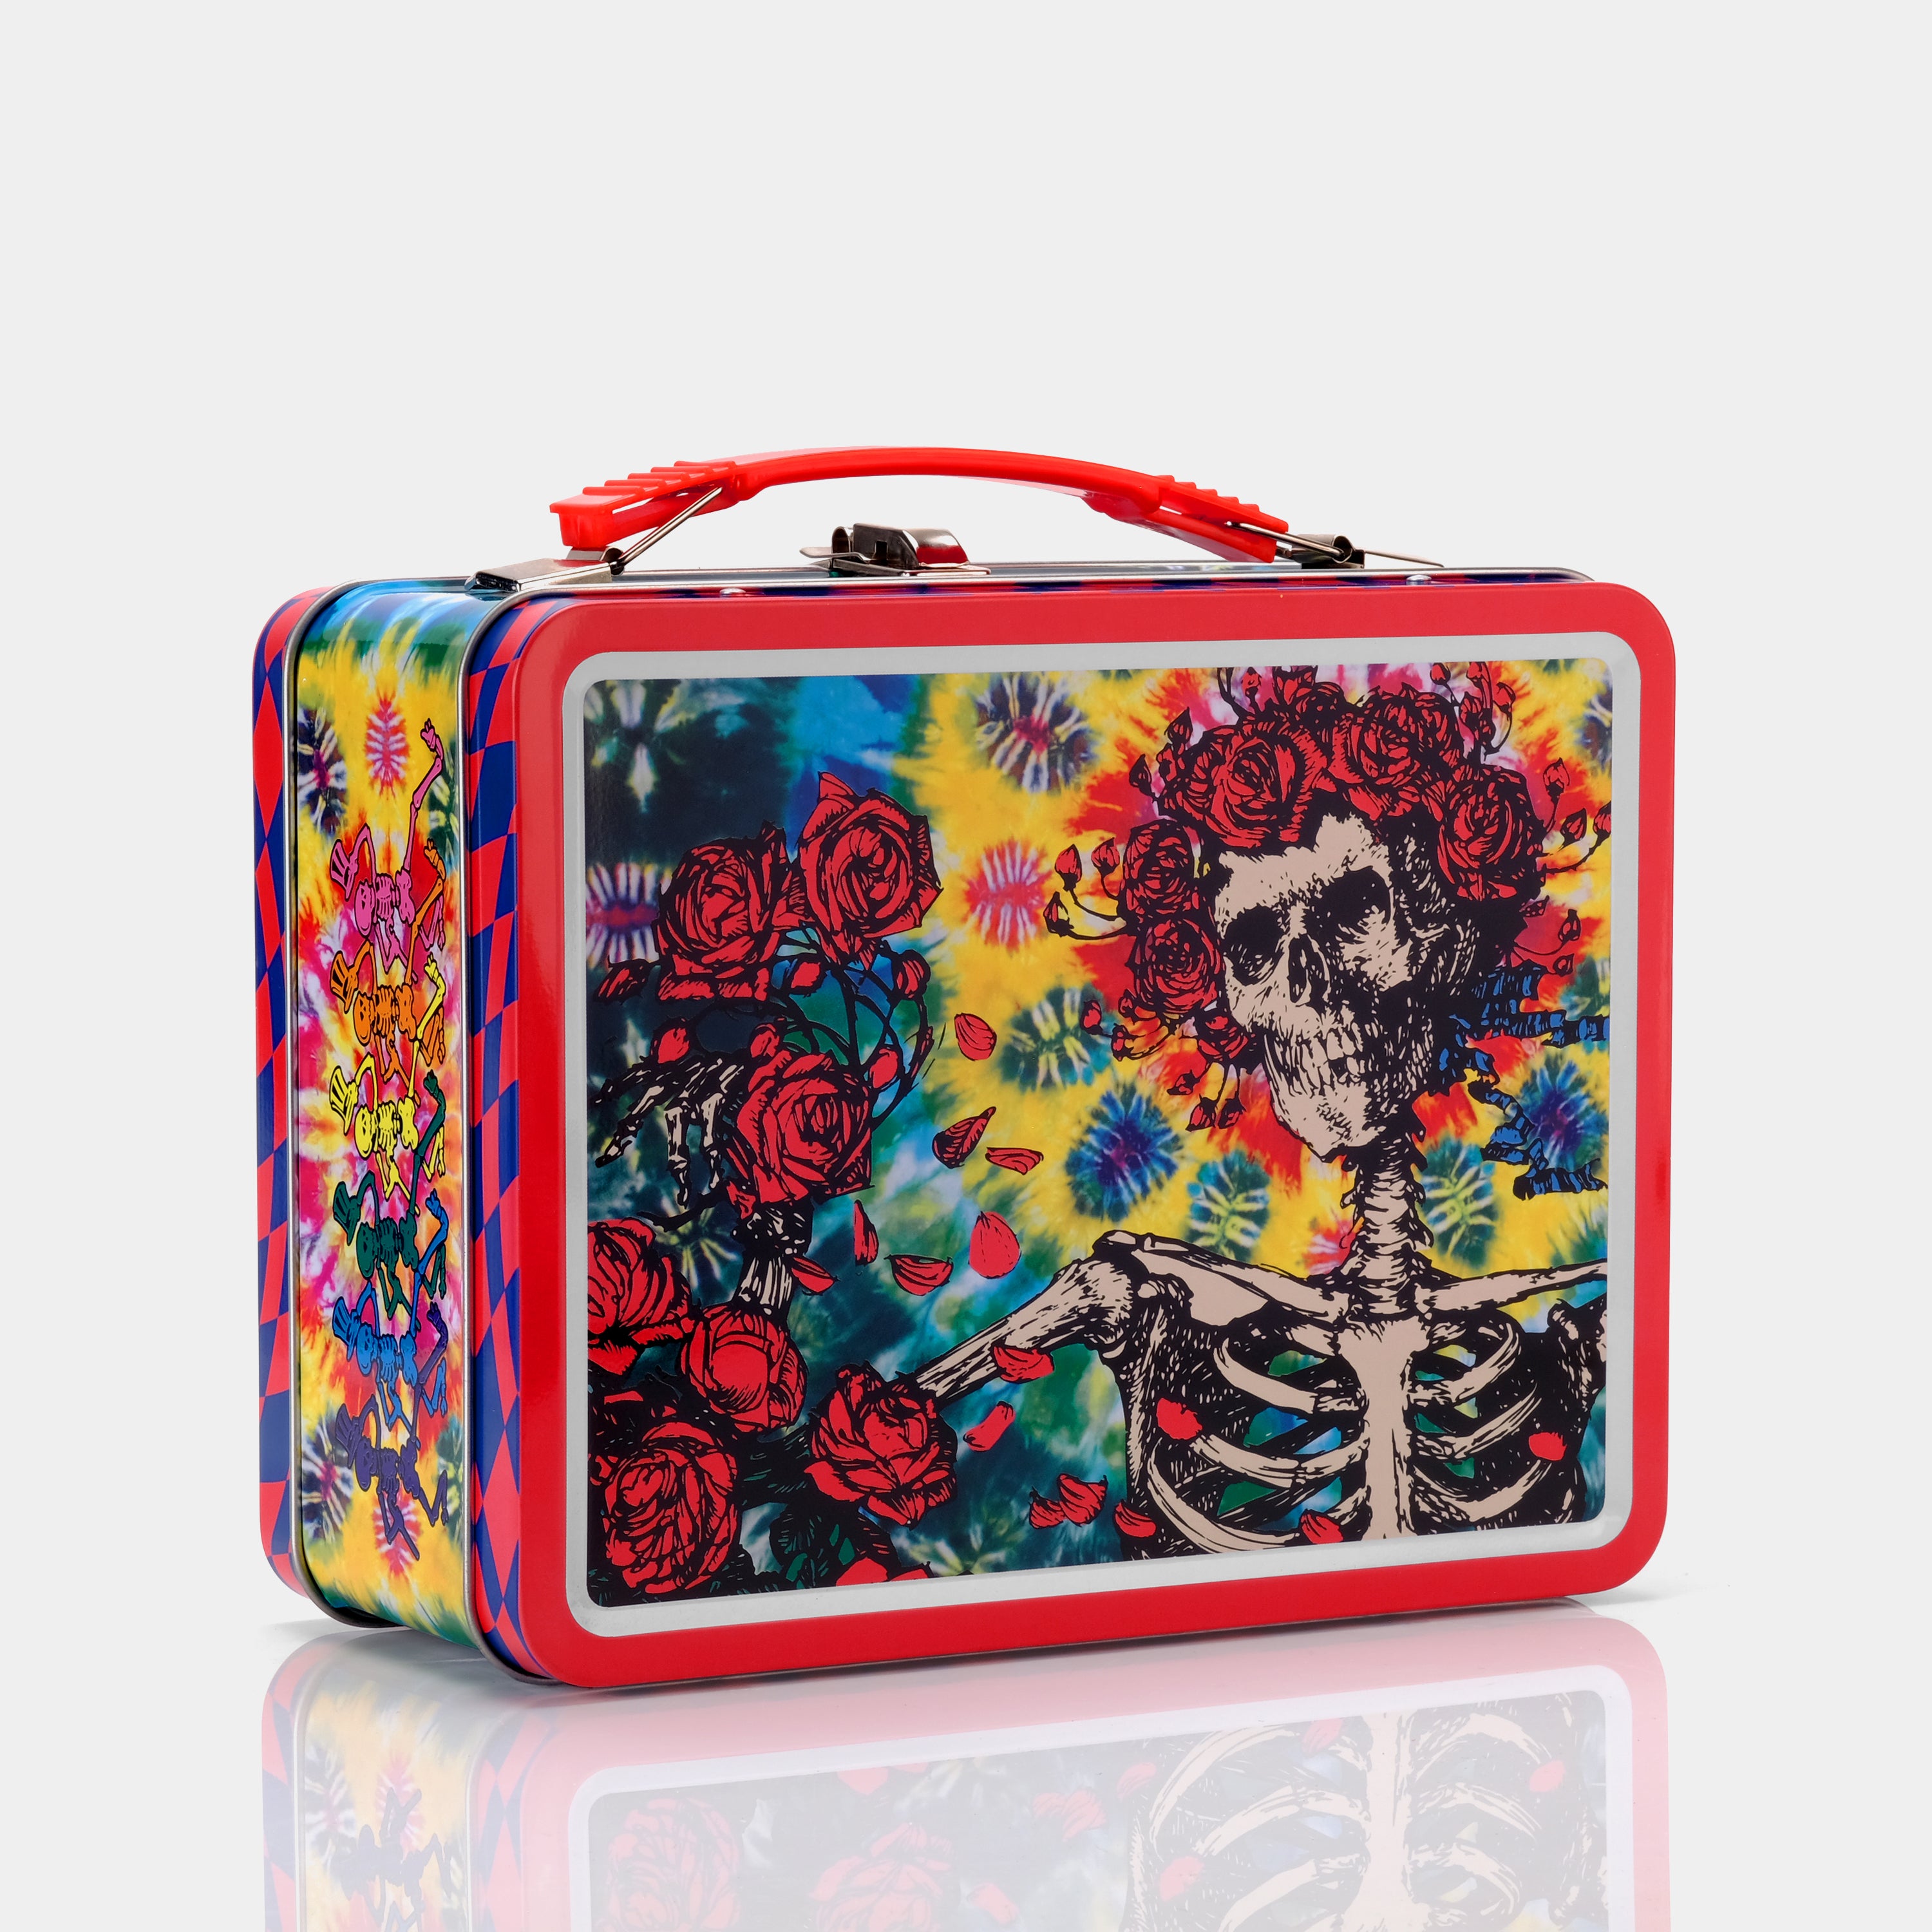 Grateful Dead Steal Your Face (Skull and Roses) Vintage-Inspired Tin Lunchbox